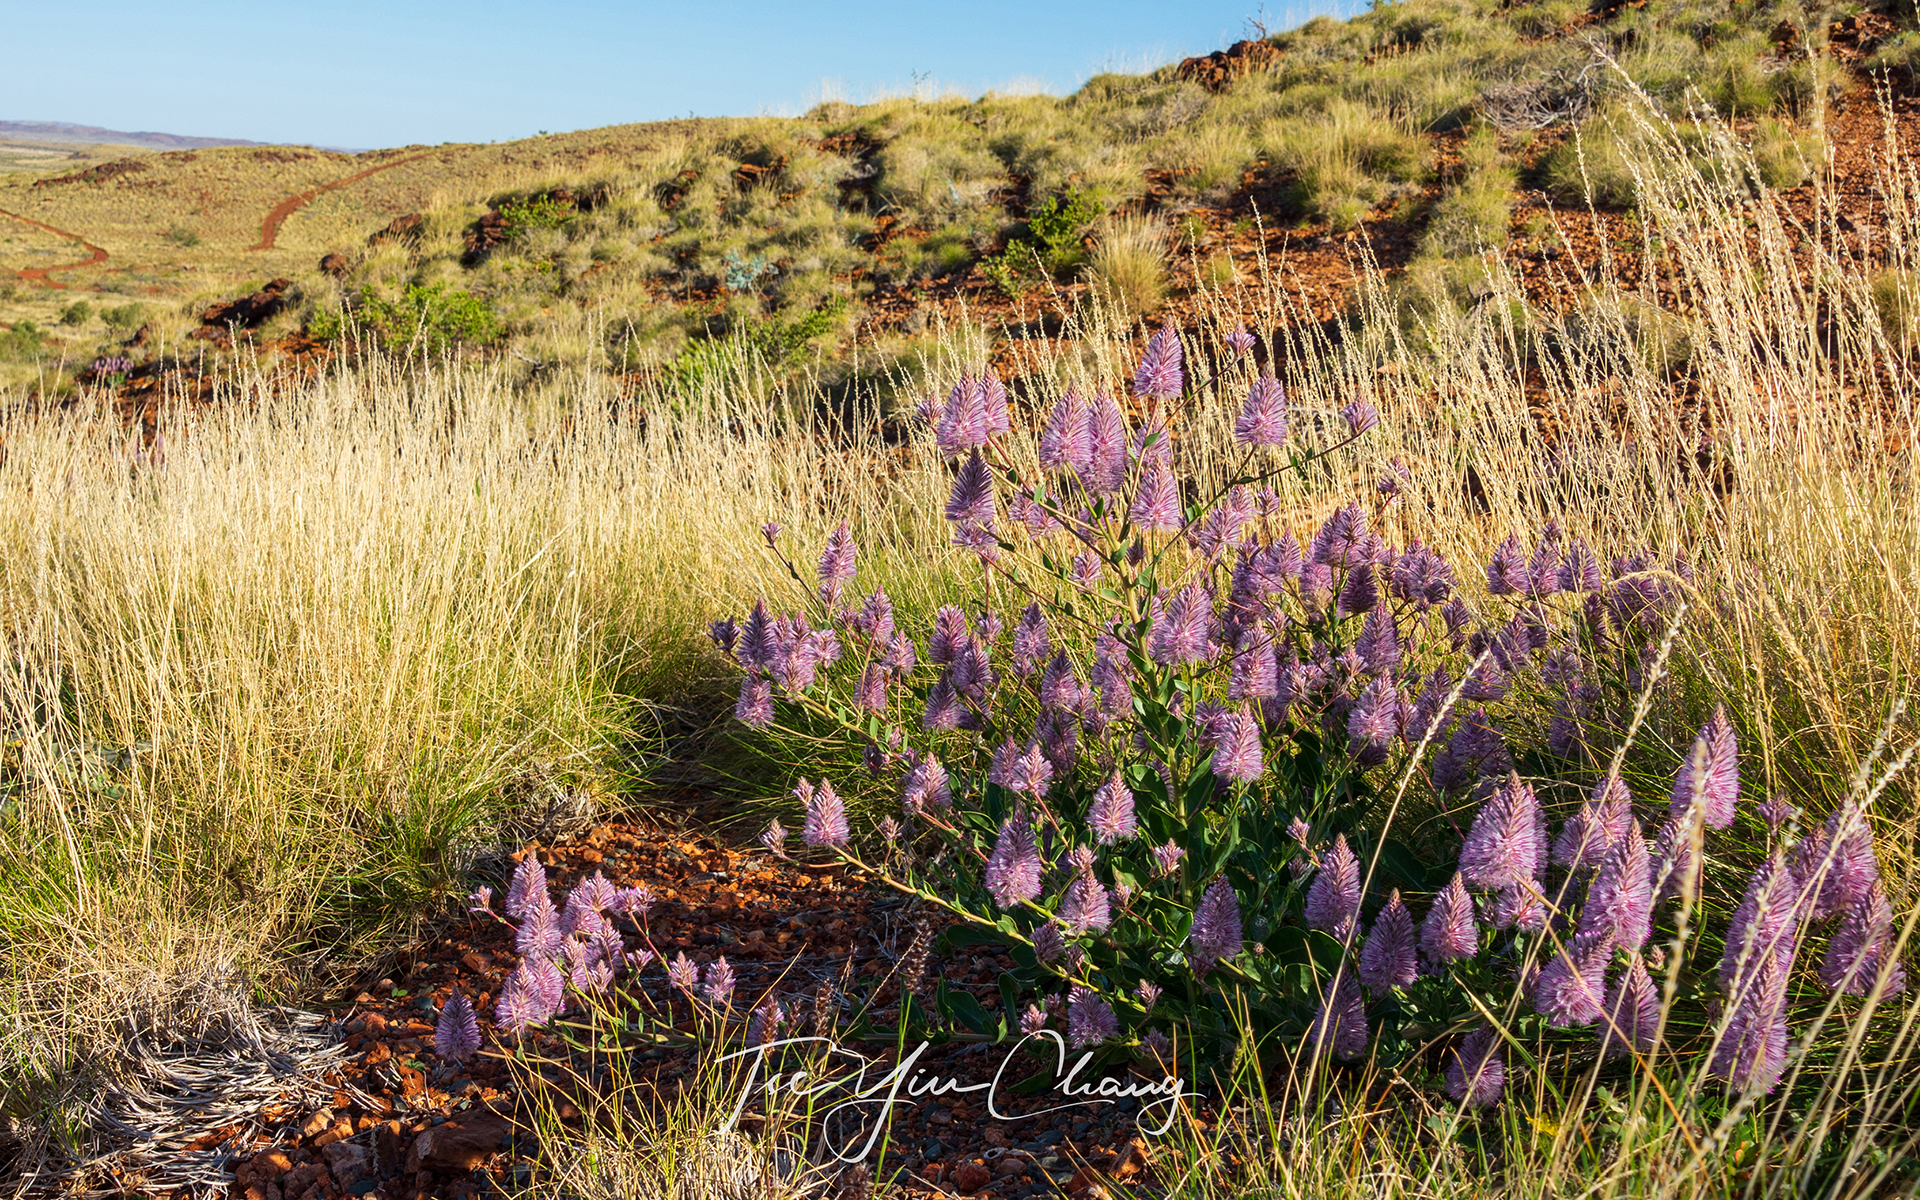 Mulla mulla in Tank Hill, Wickham. These lovely purple wildflowers are abundant in the Pilbara during spring